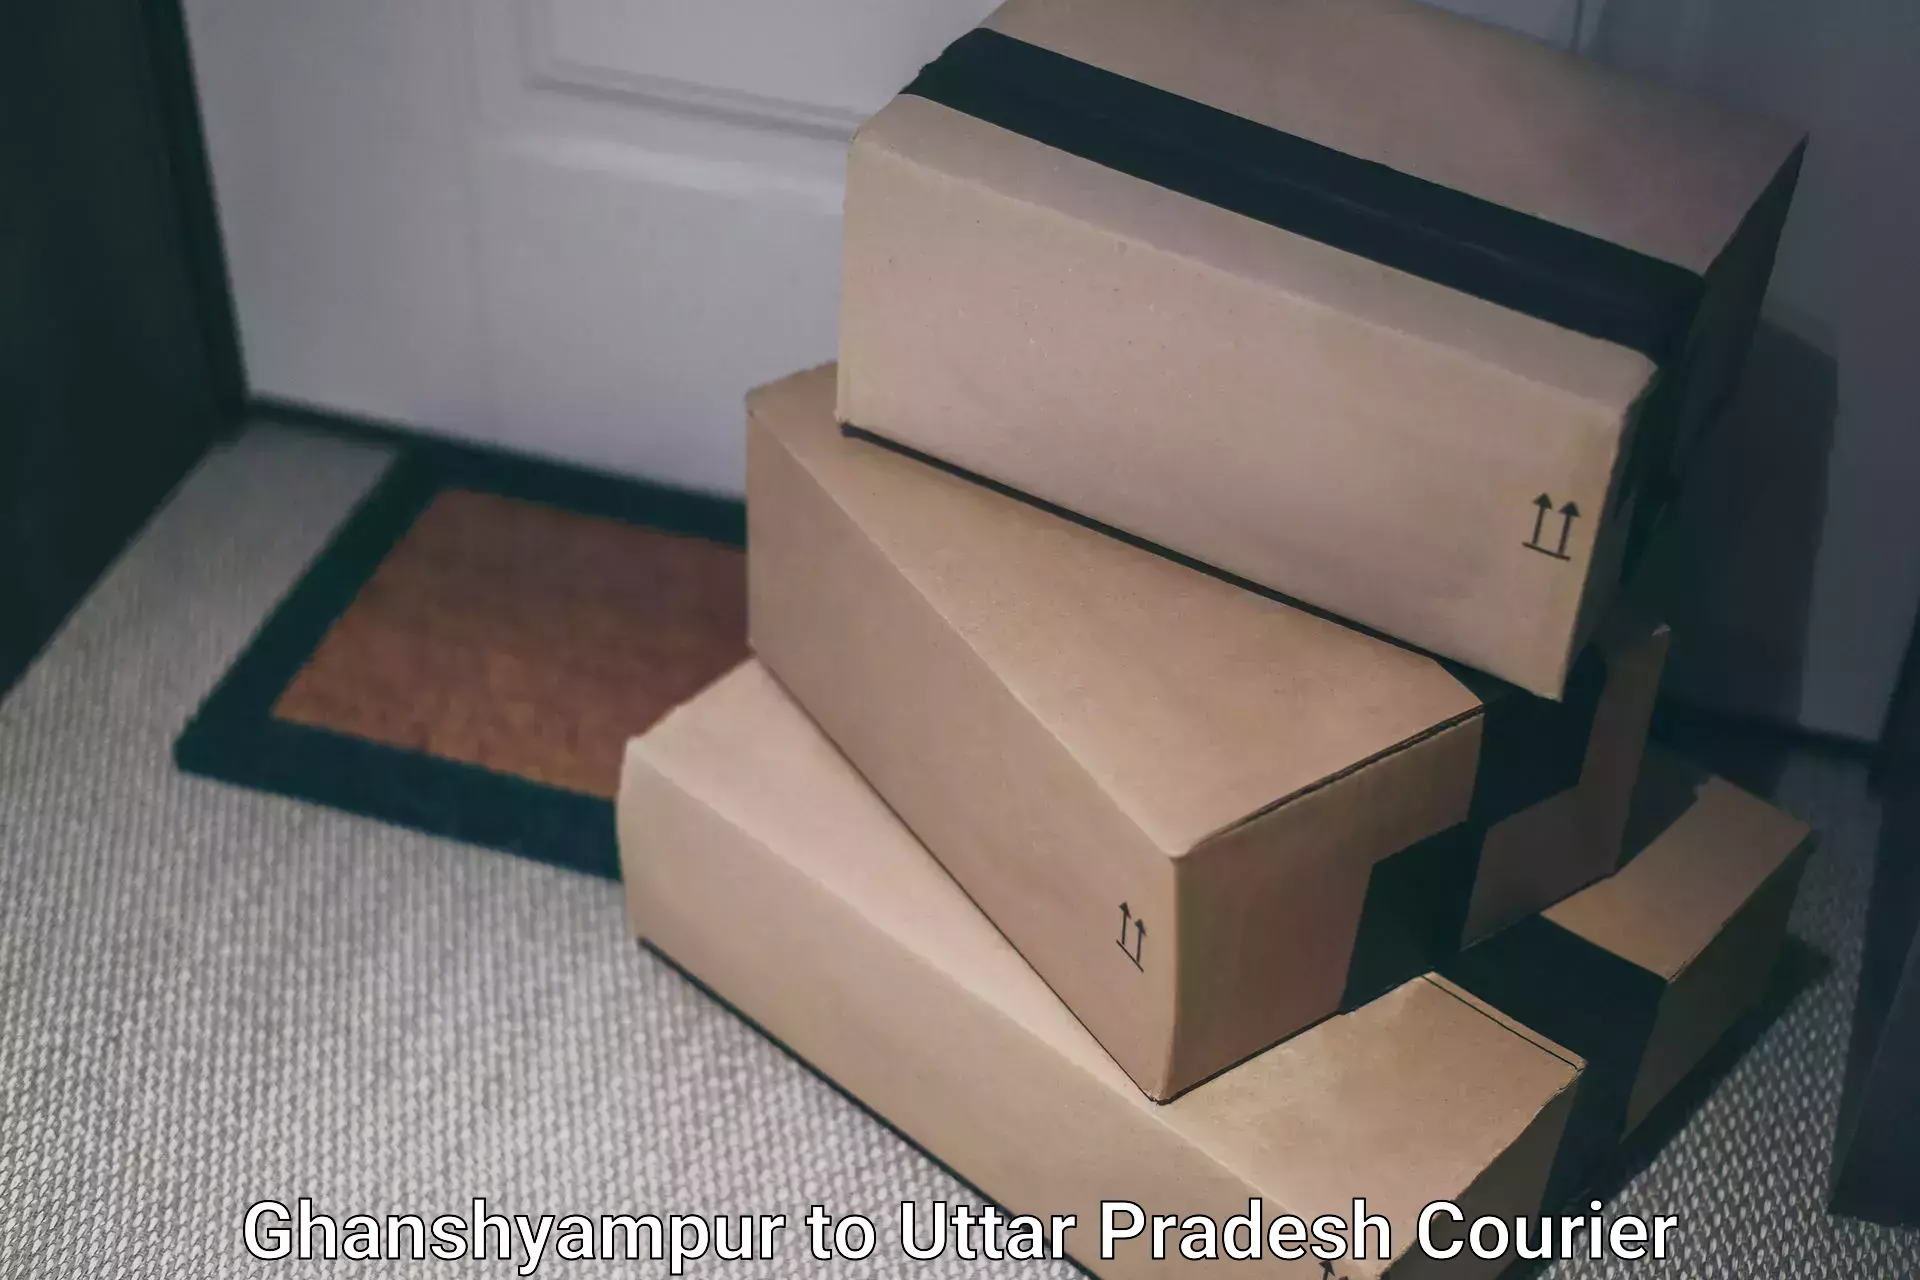 Affordable parcel service Ghanshyampur to Hapur